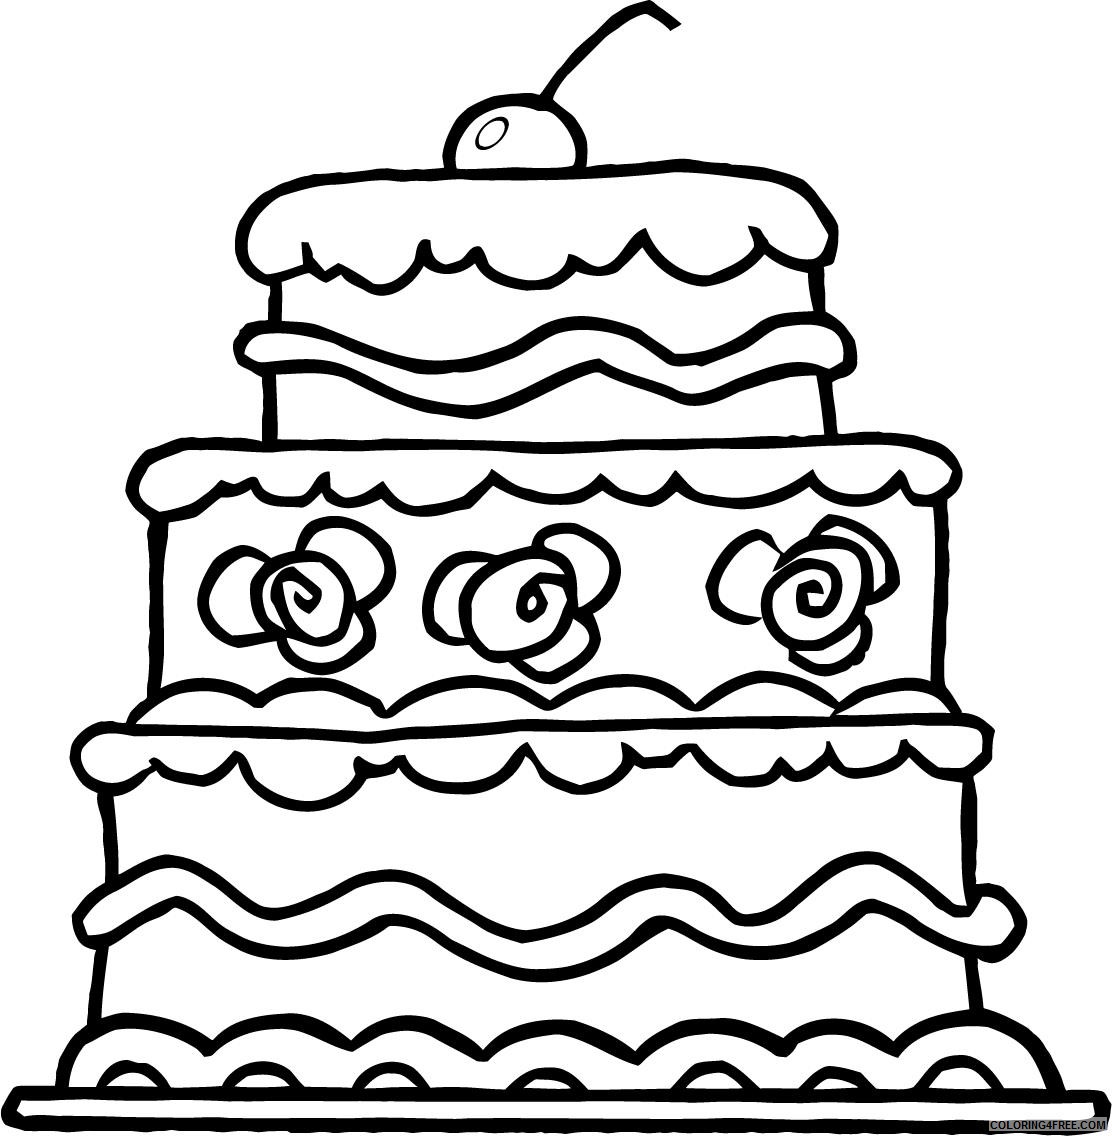 cherry cake coloring pages for kids Coloring4free